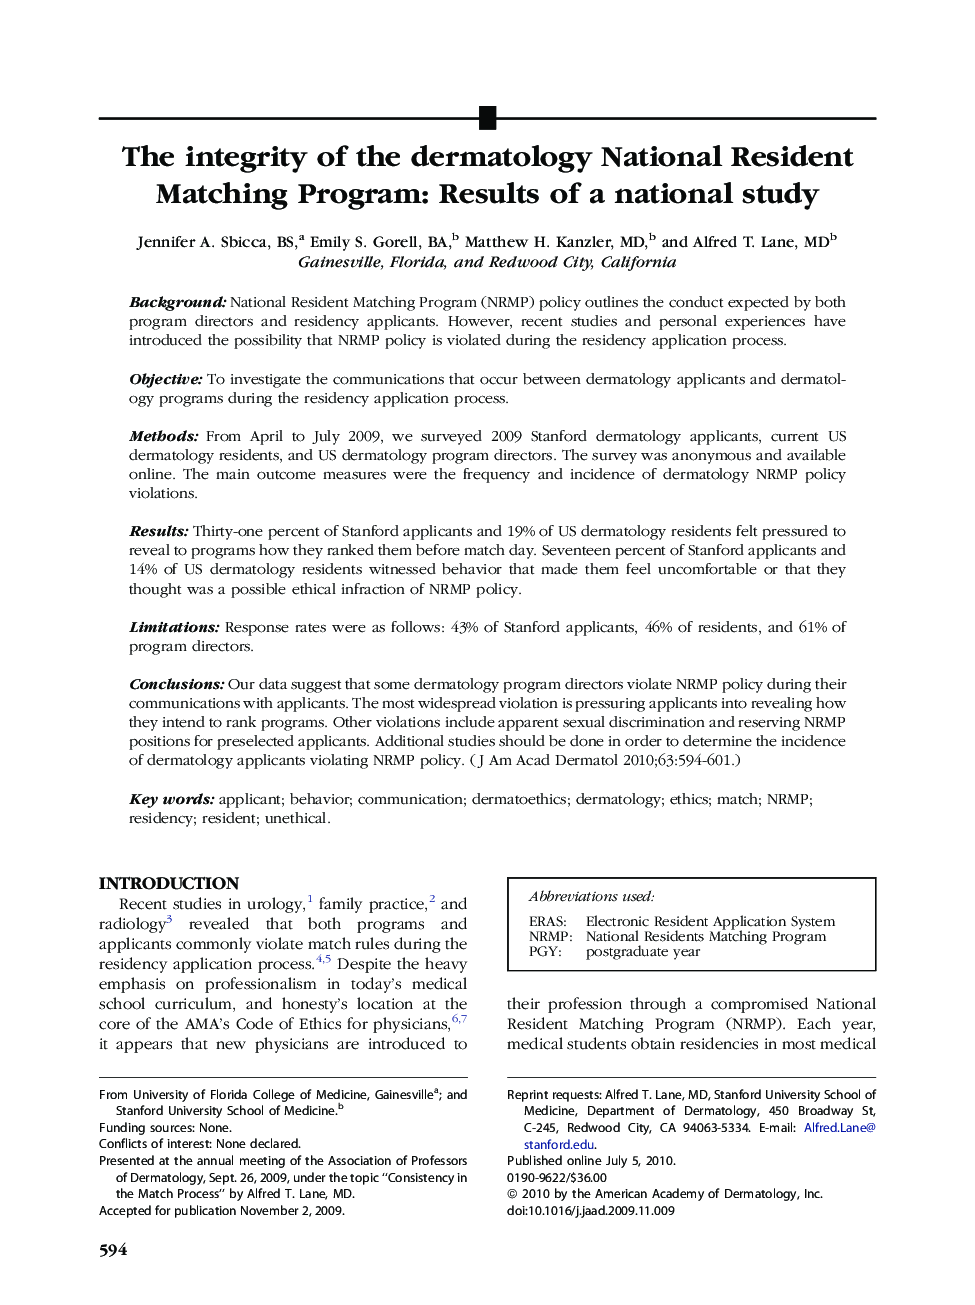 The integrity of the dermatology National Resident Matching Program: Results of a national study 